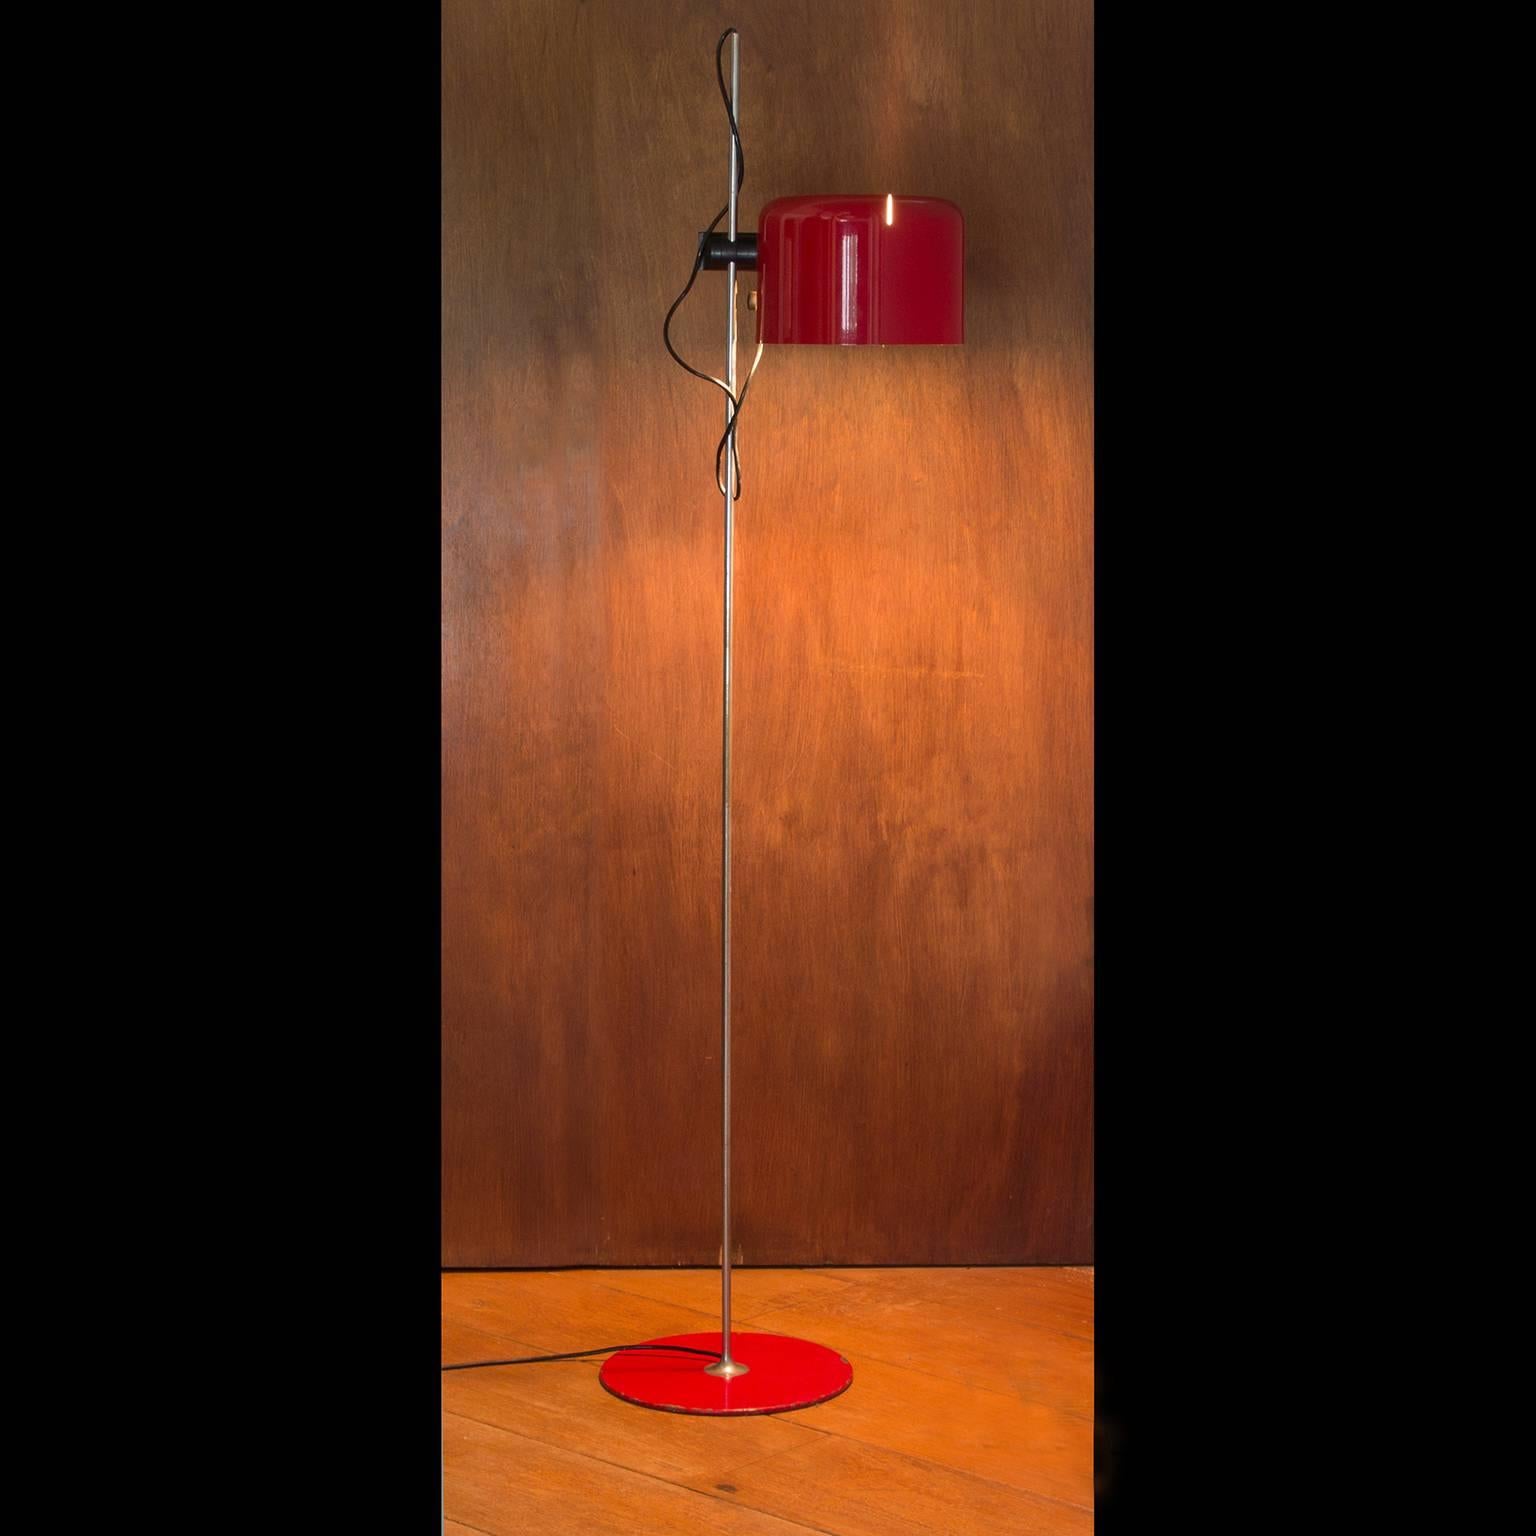 Vintage coupe floor Lamp, featuring red enameled metal and chromed steel. Enameled shade adjusts with black plastic hinge on stem; shade tilts, rotates and adjusts height of reflector. In 1968 this was the winner of the International Design Award